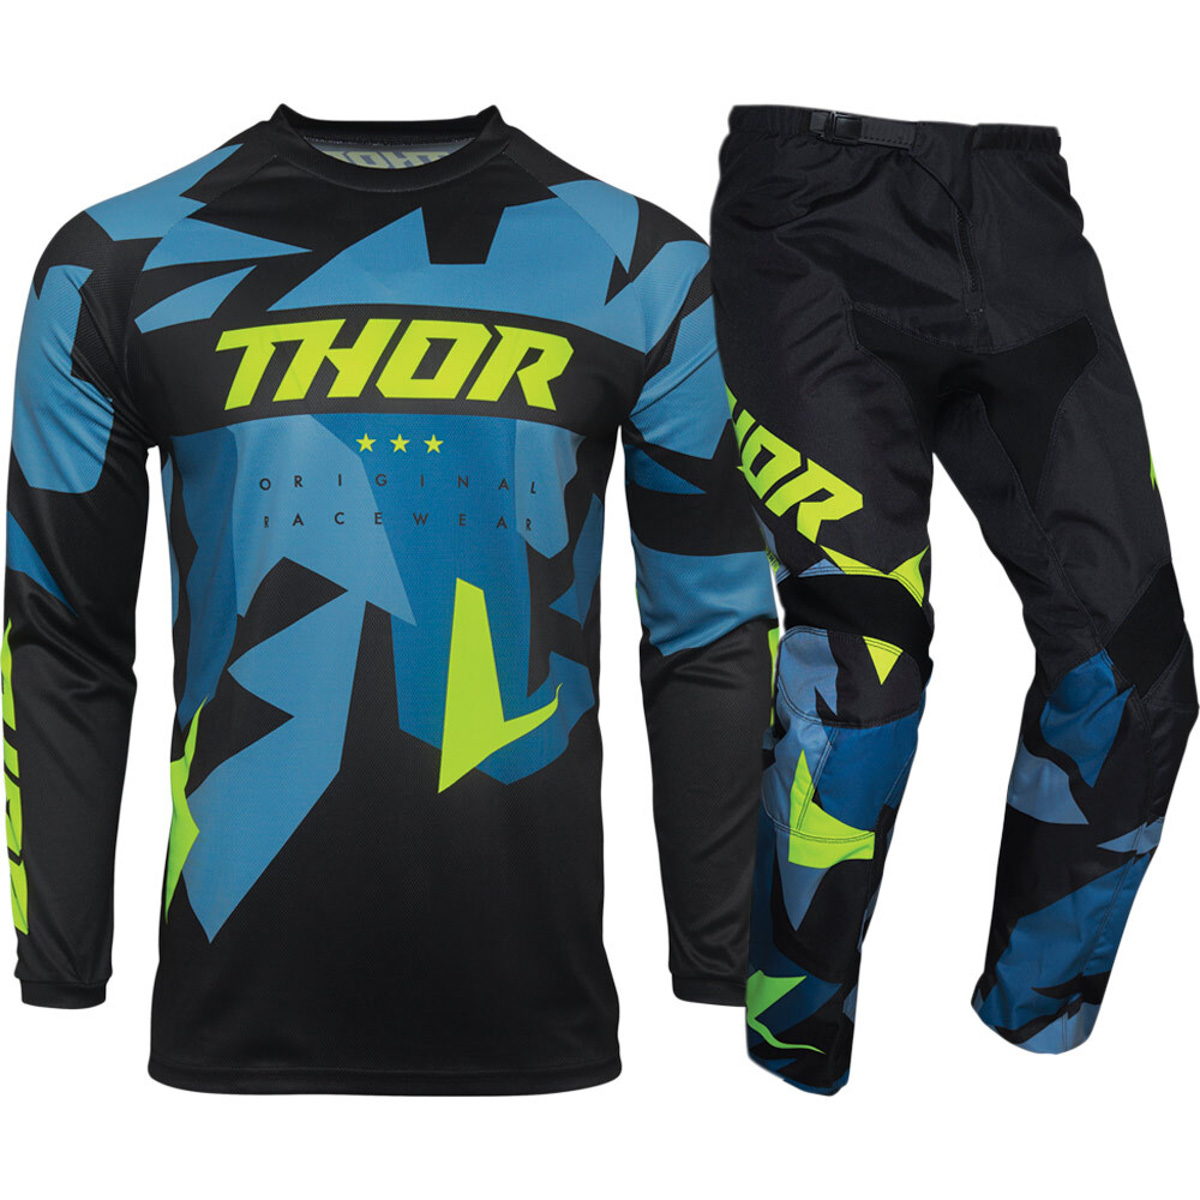 What To Wear Dirt Bike Riding  Protective Gear You Actually Need   Motocross Hideout